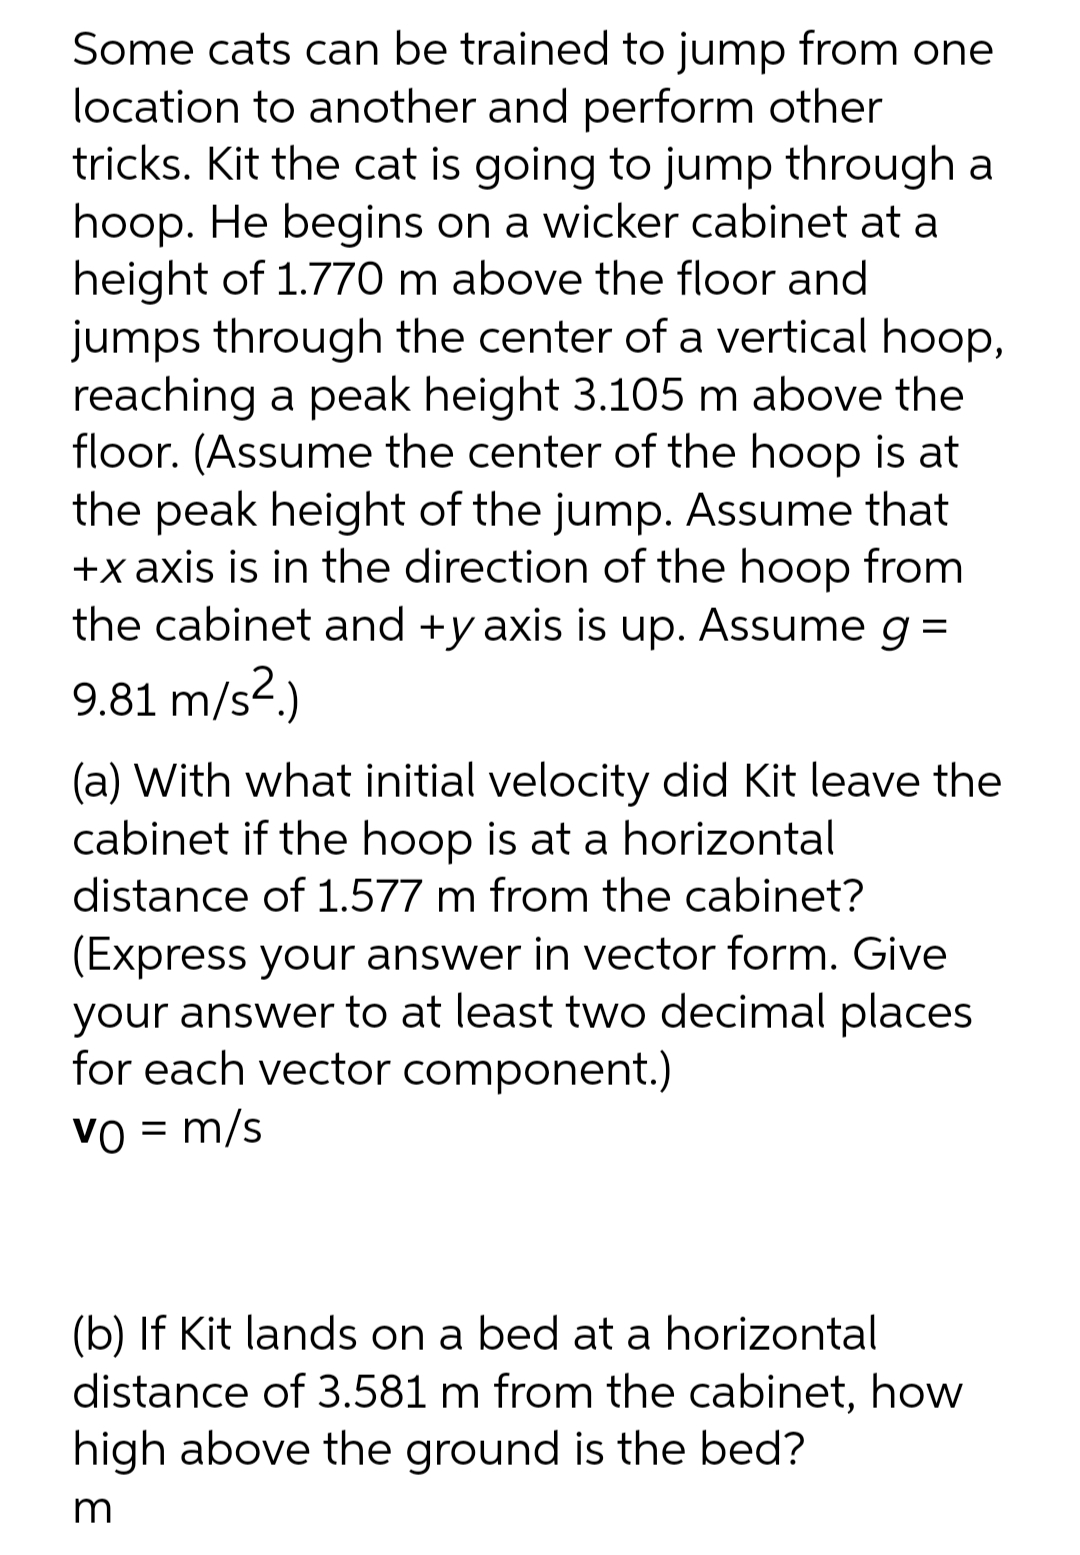 Some cats can be trained to jump from one
location to another and perform other
tricks. Kit the cat is going to jump through a
hoop. He begins on a wicker cabinet at a
height of 1.770 m above the floor and
jumps through the center of a vertical hoop,
reaching a peak height 3.105 m above the
floor. (Assume the center of the hoop is at
the peak height of the jump. Assume that
+x axis is in the direction of the hoop from
the cabinet and +y axis is up. Assume g =
9.81 m/s².)
(a) With what initial velocity did Kit leave the
cabinet if the hoop is at a horizontal
distance of 1.577 m from the cabinet?
(Express your answer in vector form. Give
your answer to at least two decimal places
for each vector component.)
Vo = m/s
(b) If Kit lands on a bed at a horizontal
distance of 3.581 m from the cabinet, how
high above the ground is the bed?
m